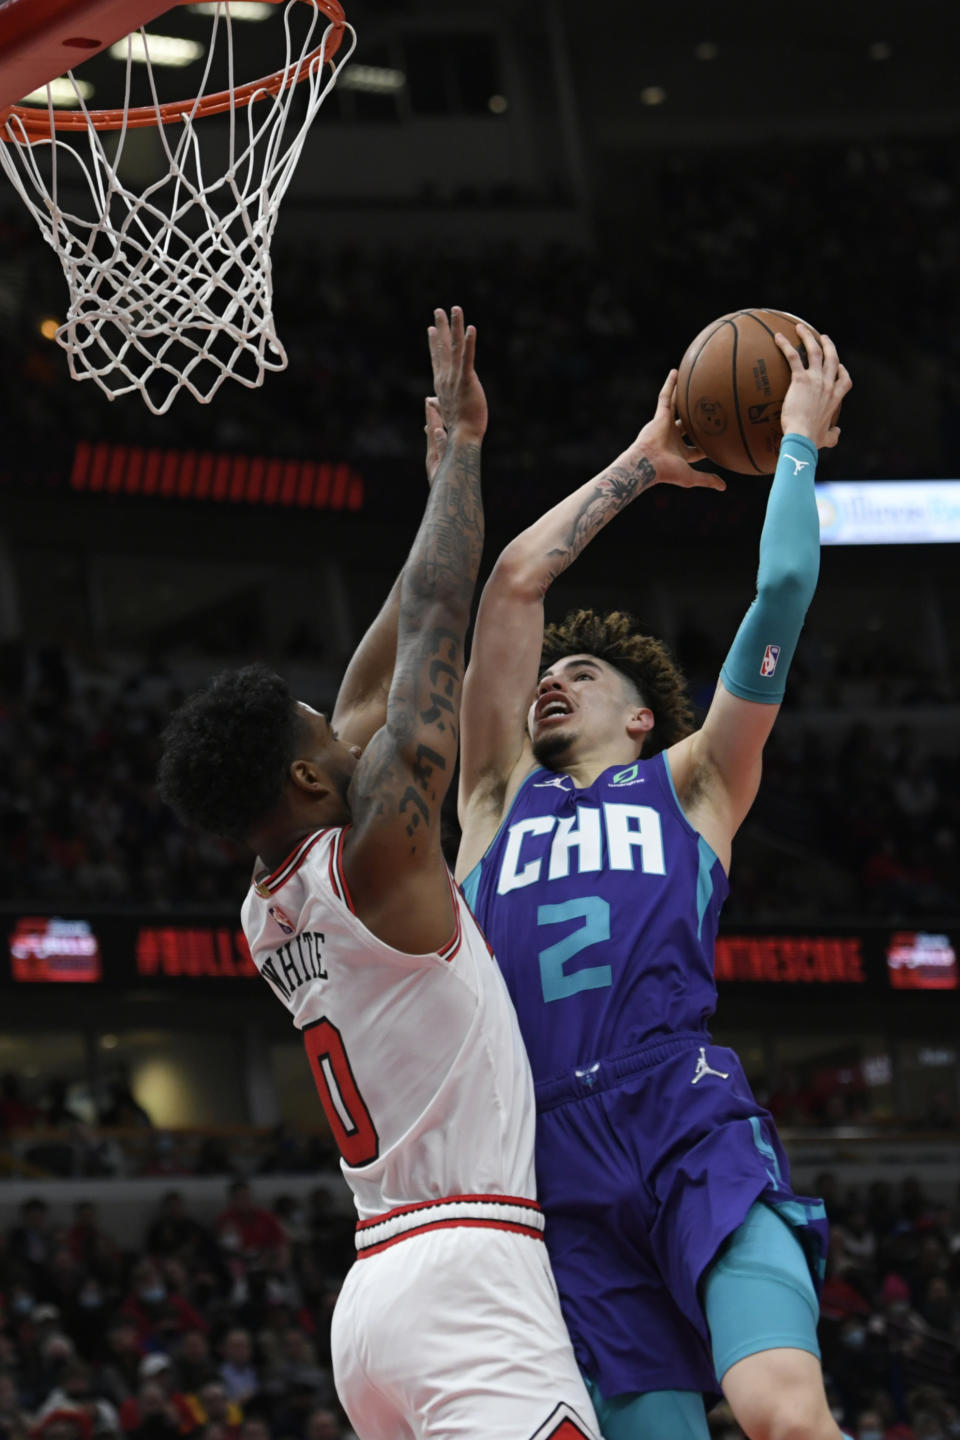 Charlotte Hornets guard LaMelo Ball (2) goes up for a shot against Chicago Bulls guard Coby White (0) during the second half of a NBA basketball game Monday, Nov. 29, 2021 in Chicago. Chicago won 133-119. (AP Photo/Paul Beaty)